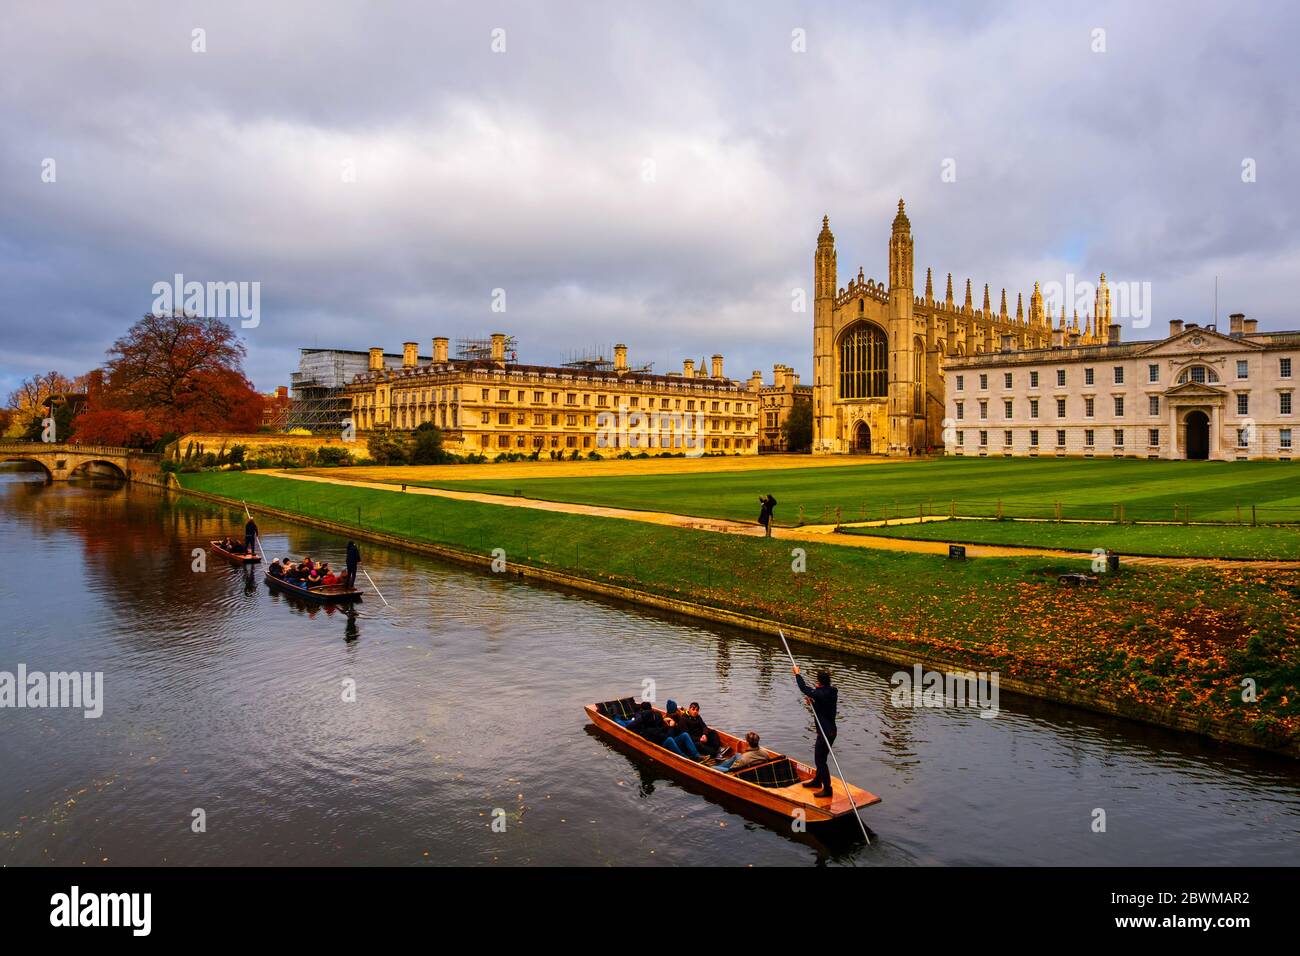 CAMBRIDGE, UK - NOVEMBER 7, 2019: View of University with Chapel in Cambridge, England, UK during the cloudy autumn day with touristic boats in the ri Stock Photo